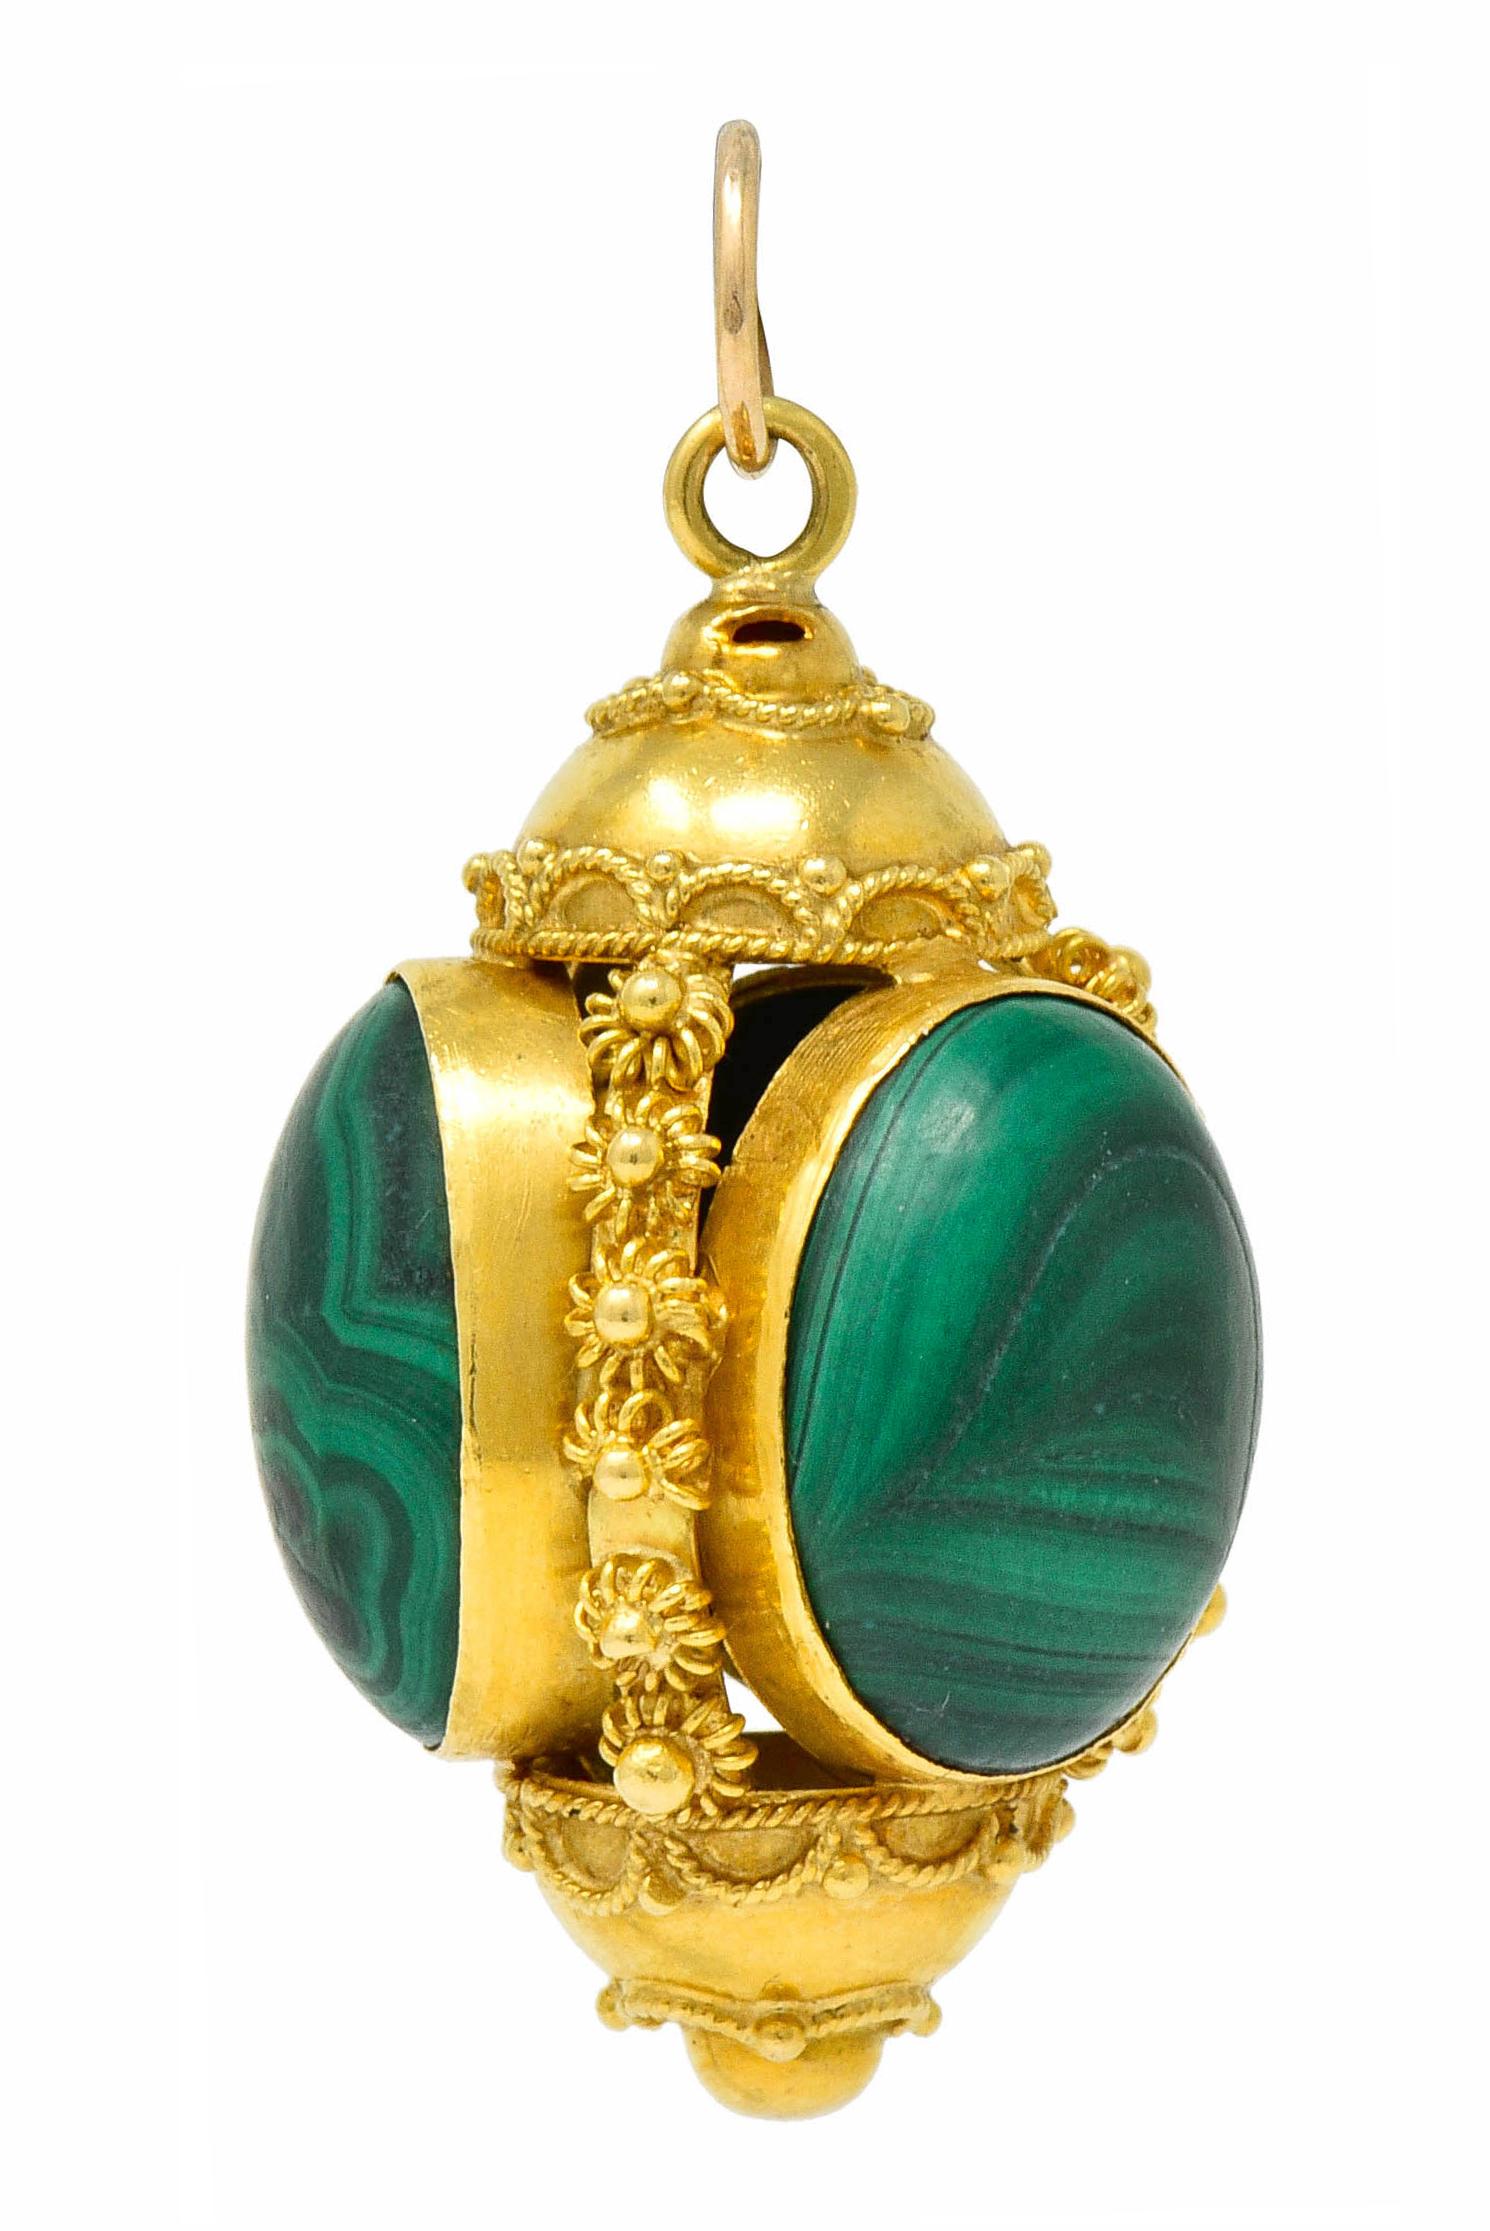 Pendant is designed as a pierced egg-like form that is decorated throughout by polished gold beads, caged florals, and a draped twisted rope motif

Featuring four oval malachite cabochons, bezel set, measuring approximately 15.5 x 11.5 mm

Malachite